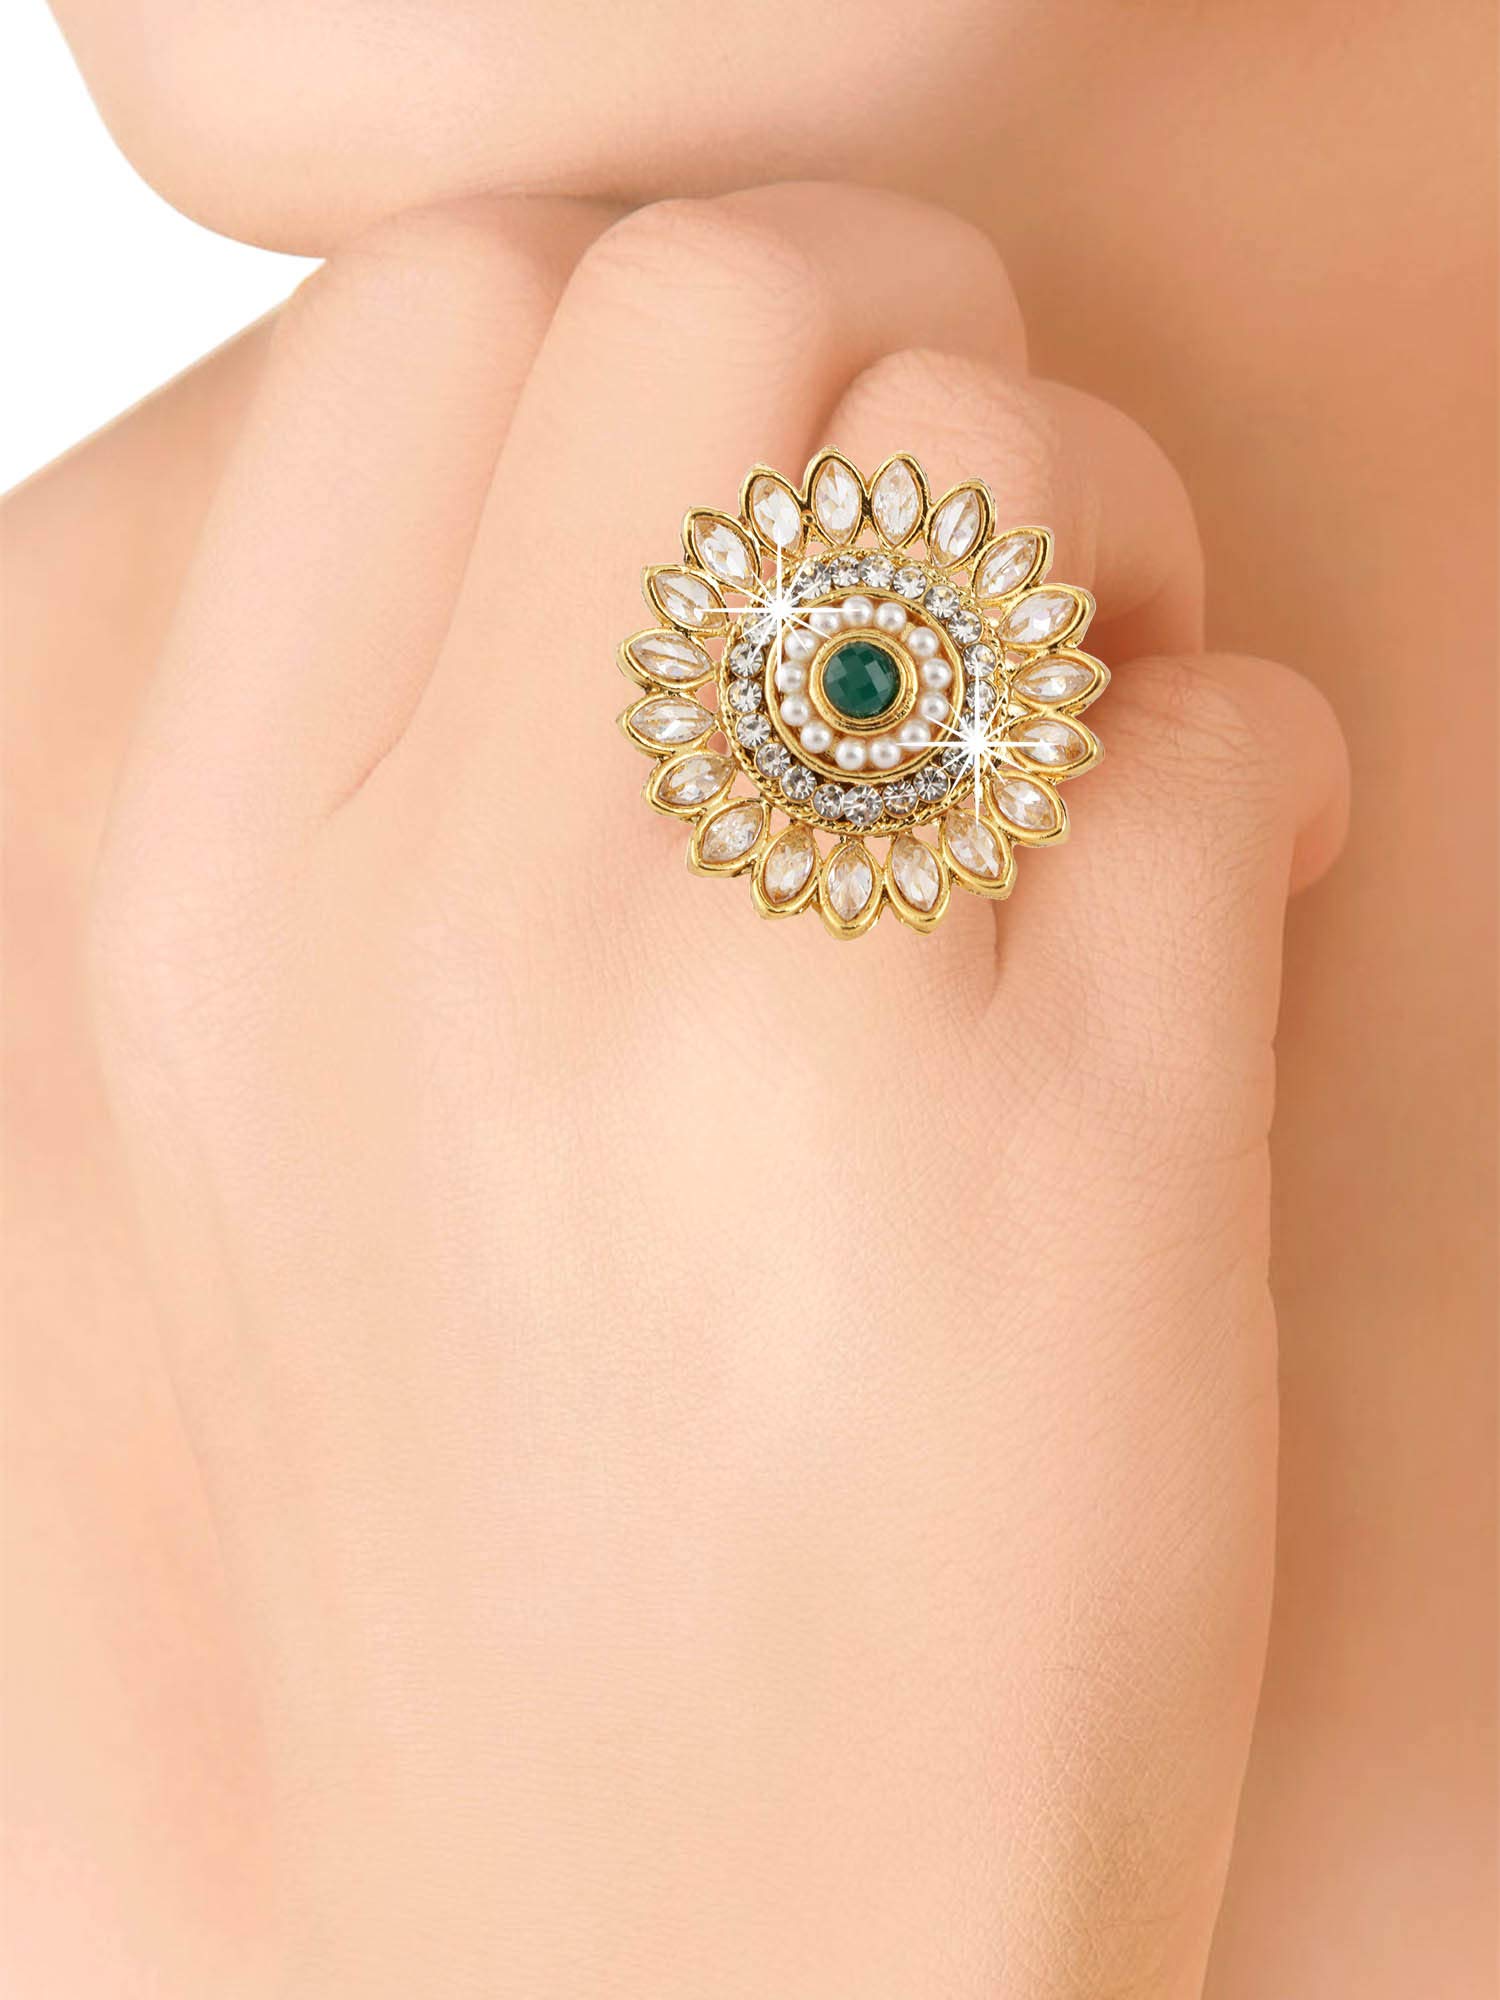 8 Cocktail rings to add flamboyance for the fierceless independent women